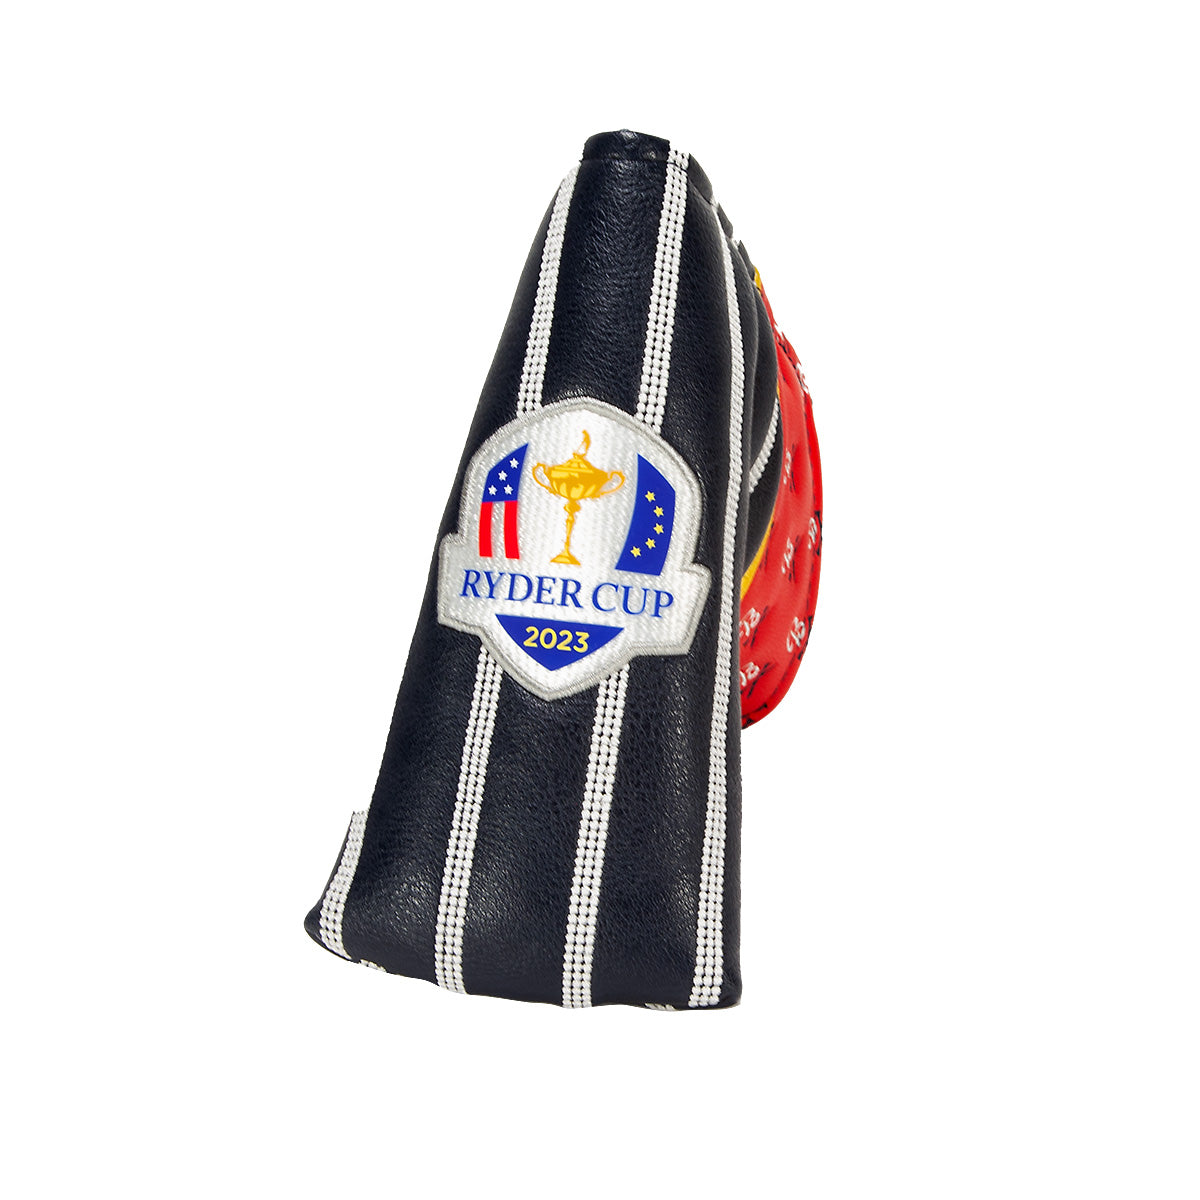 Barstool Golf x Ryder Cup Blade Putter Cover-Golf Accessories-Fore Play-Navy-One Size-Barstool Sports